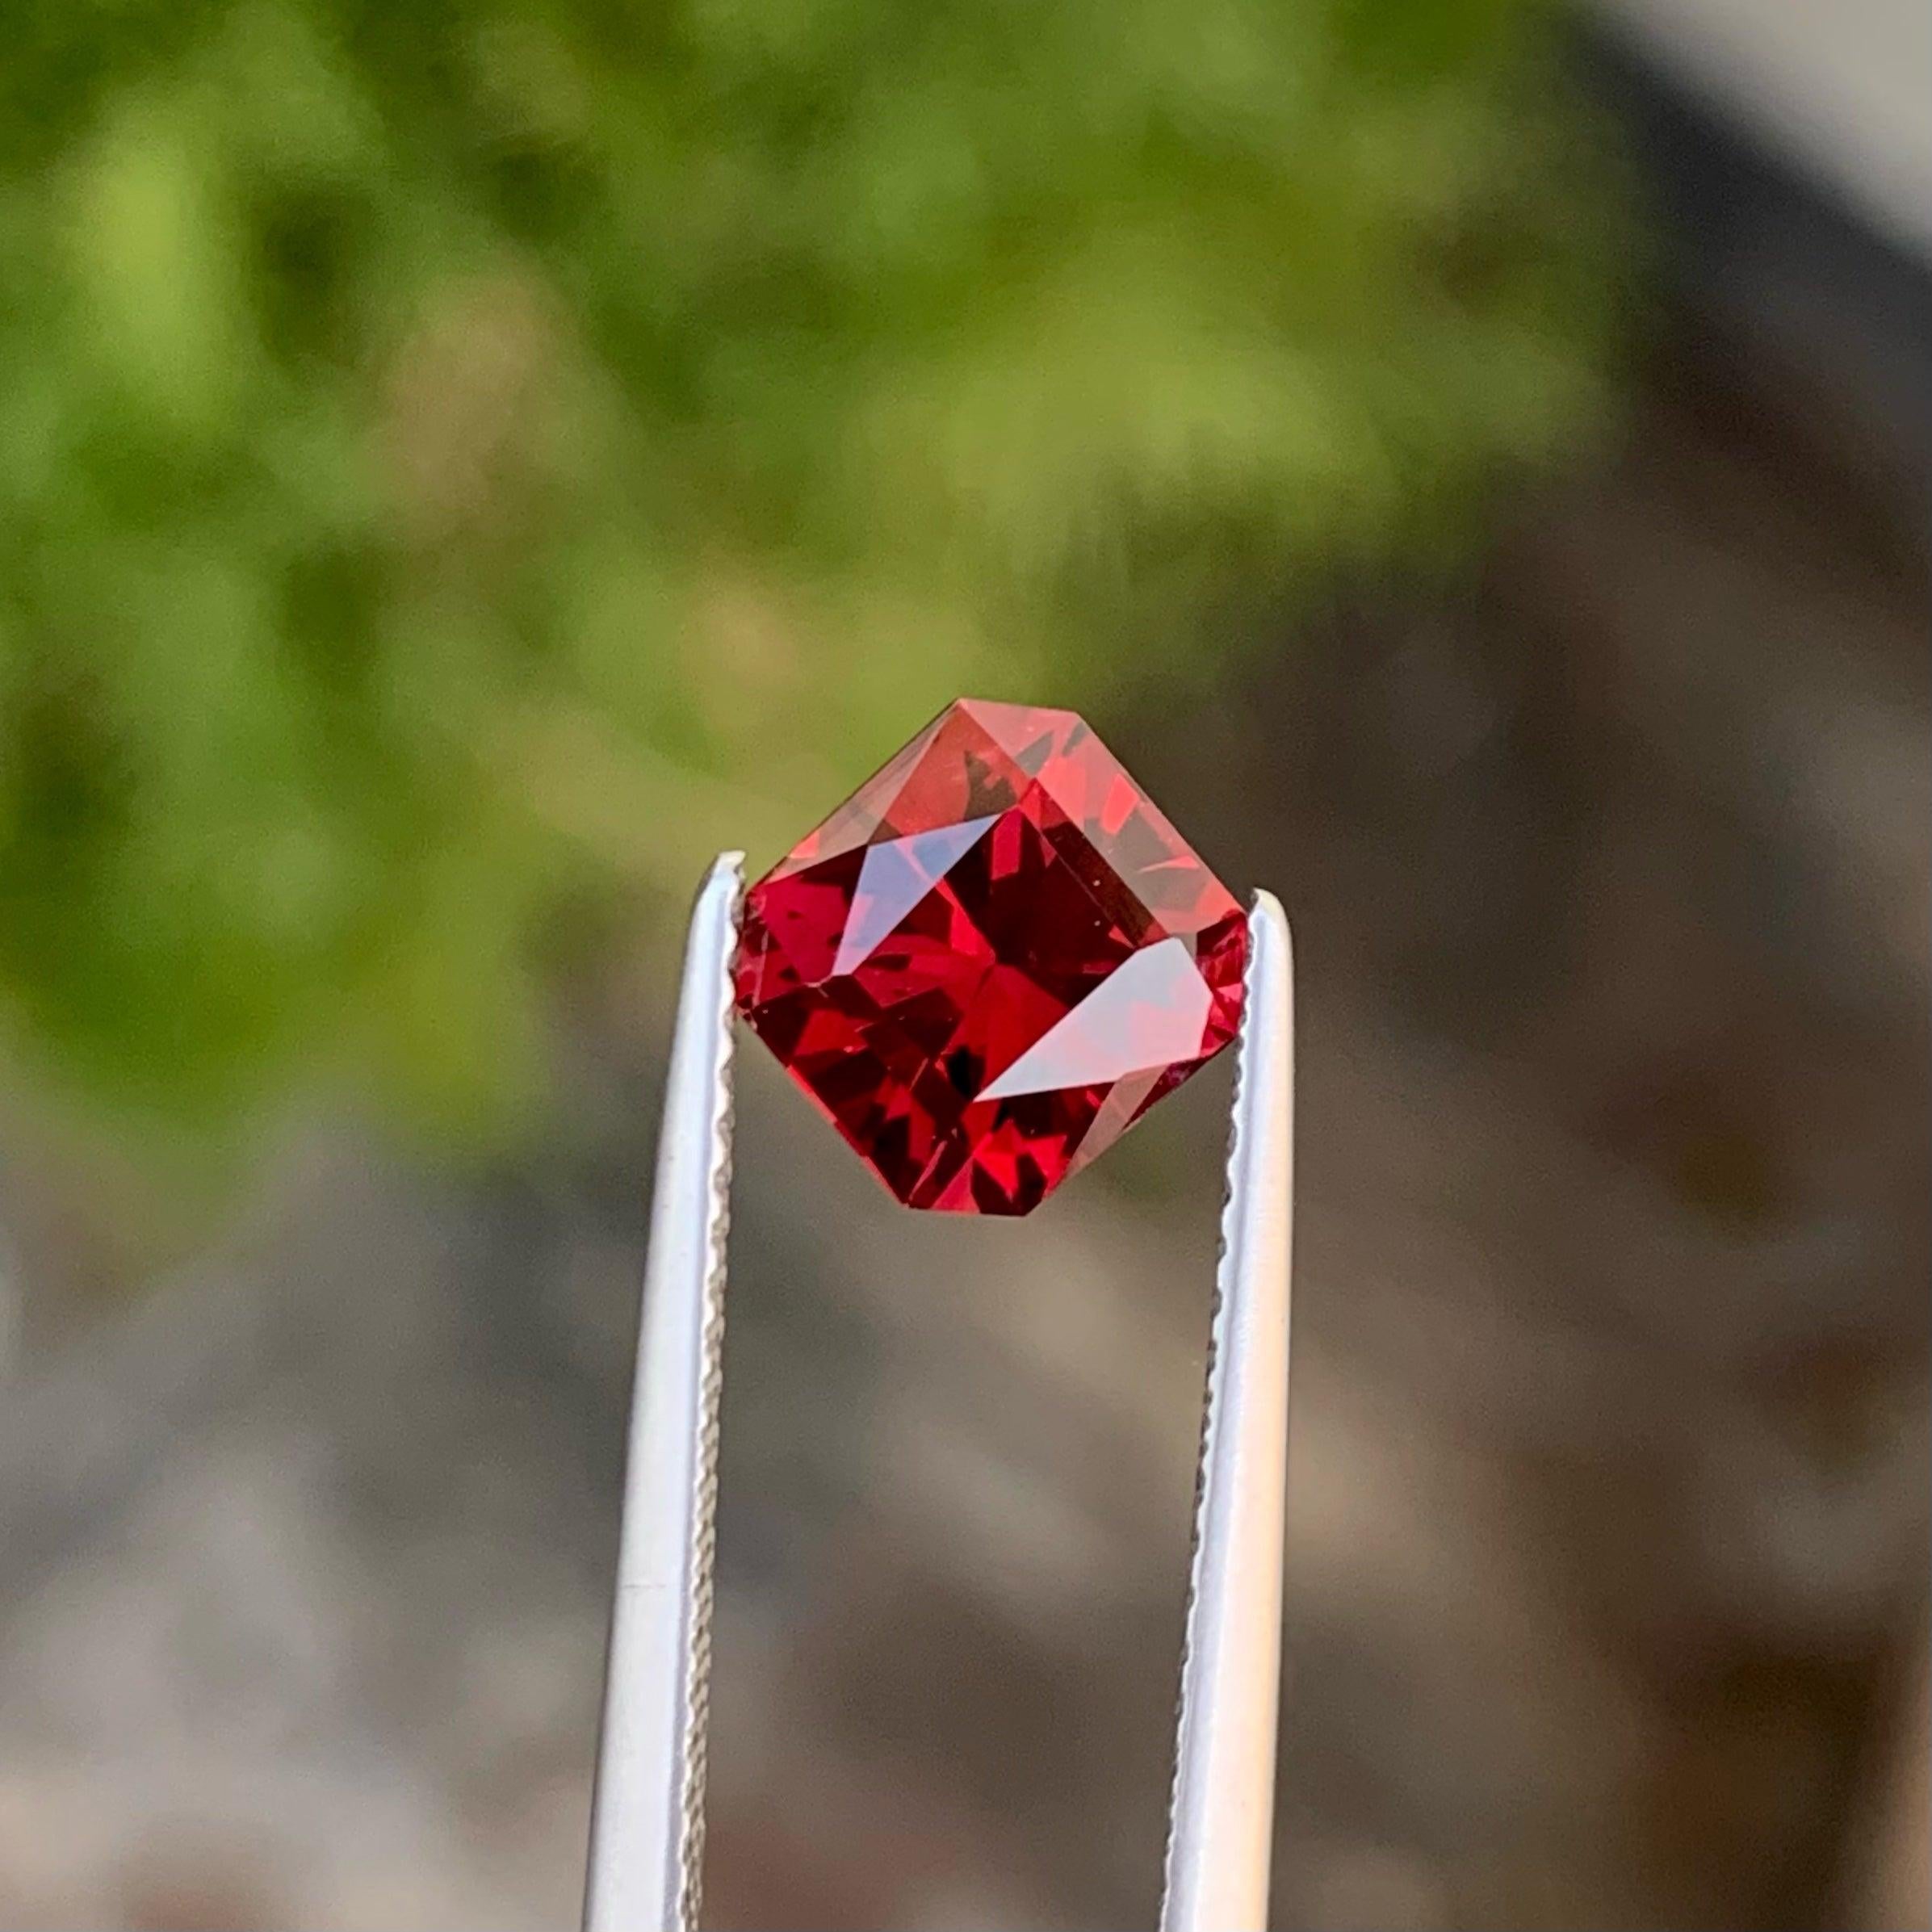 Glorious Cut Natural Garnet Gemstone, Available for sale at whole sale price natural high quality 2.10 Carats Eye Clean Clarity Natural Loose Garnet from Malawi.

Product Information:
GEMSTONE NAME: Glorious Cut Natural Garnet Gemstone
WEIGHT: 2.10